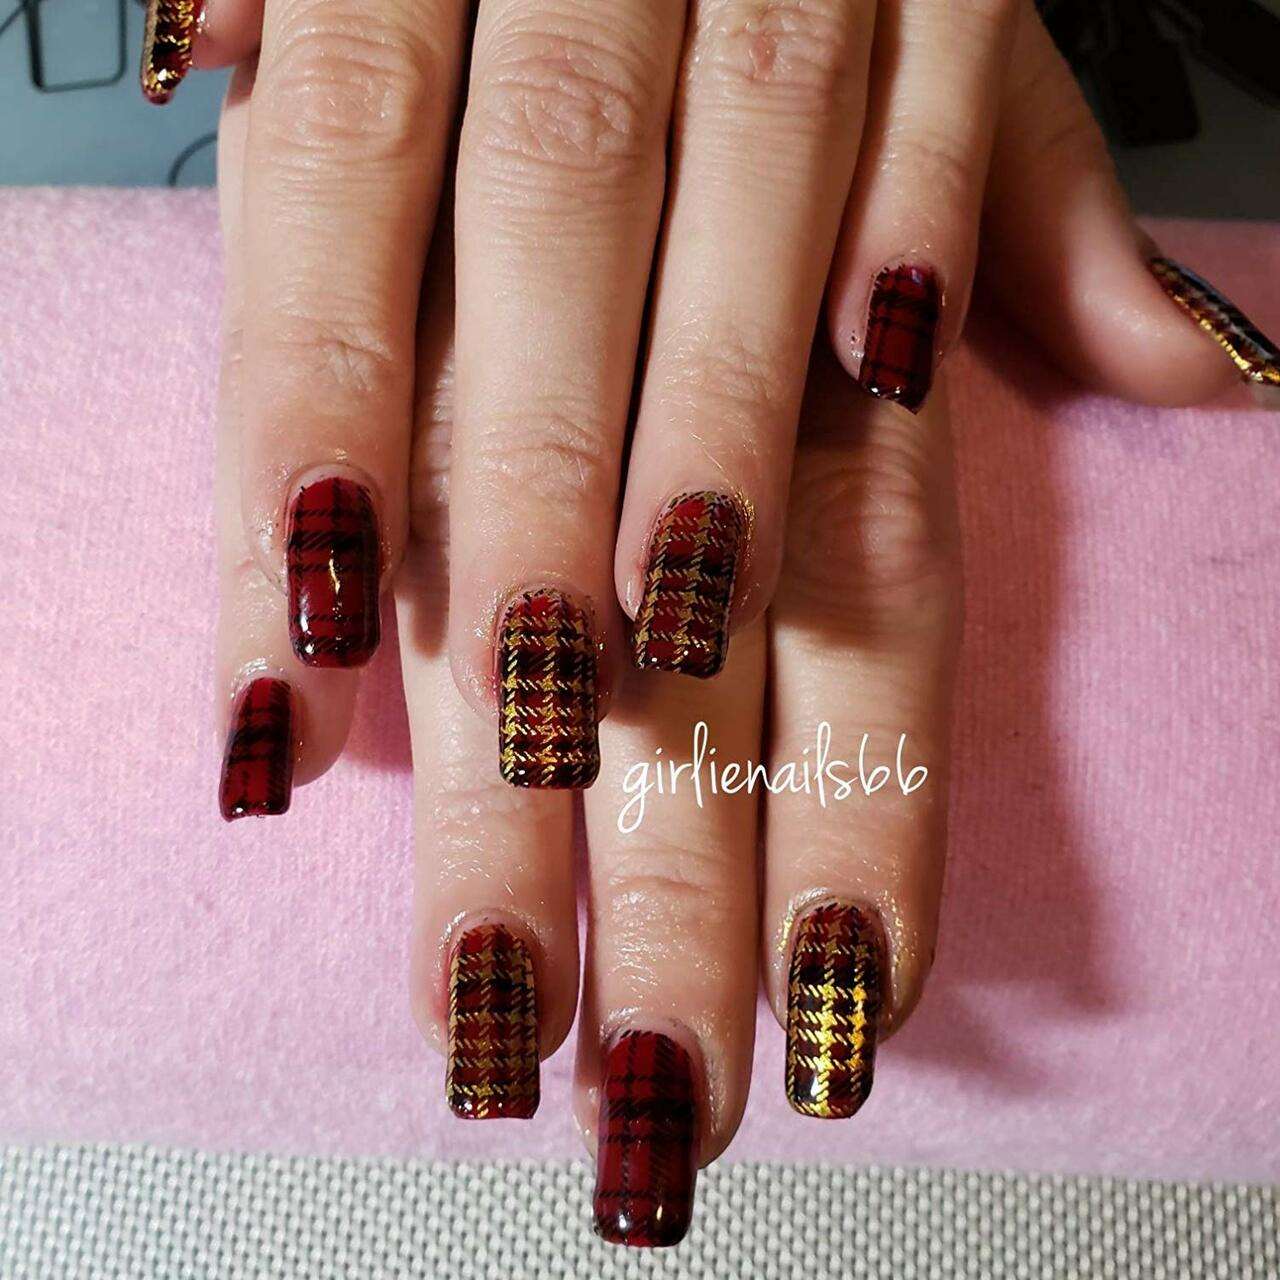 45+ Stunning Red and Gold Nails For A Sophisticated Manicure | Stylish nails,  Red and gold nails, Red nails